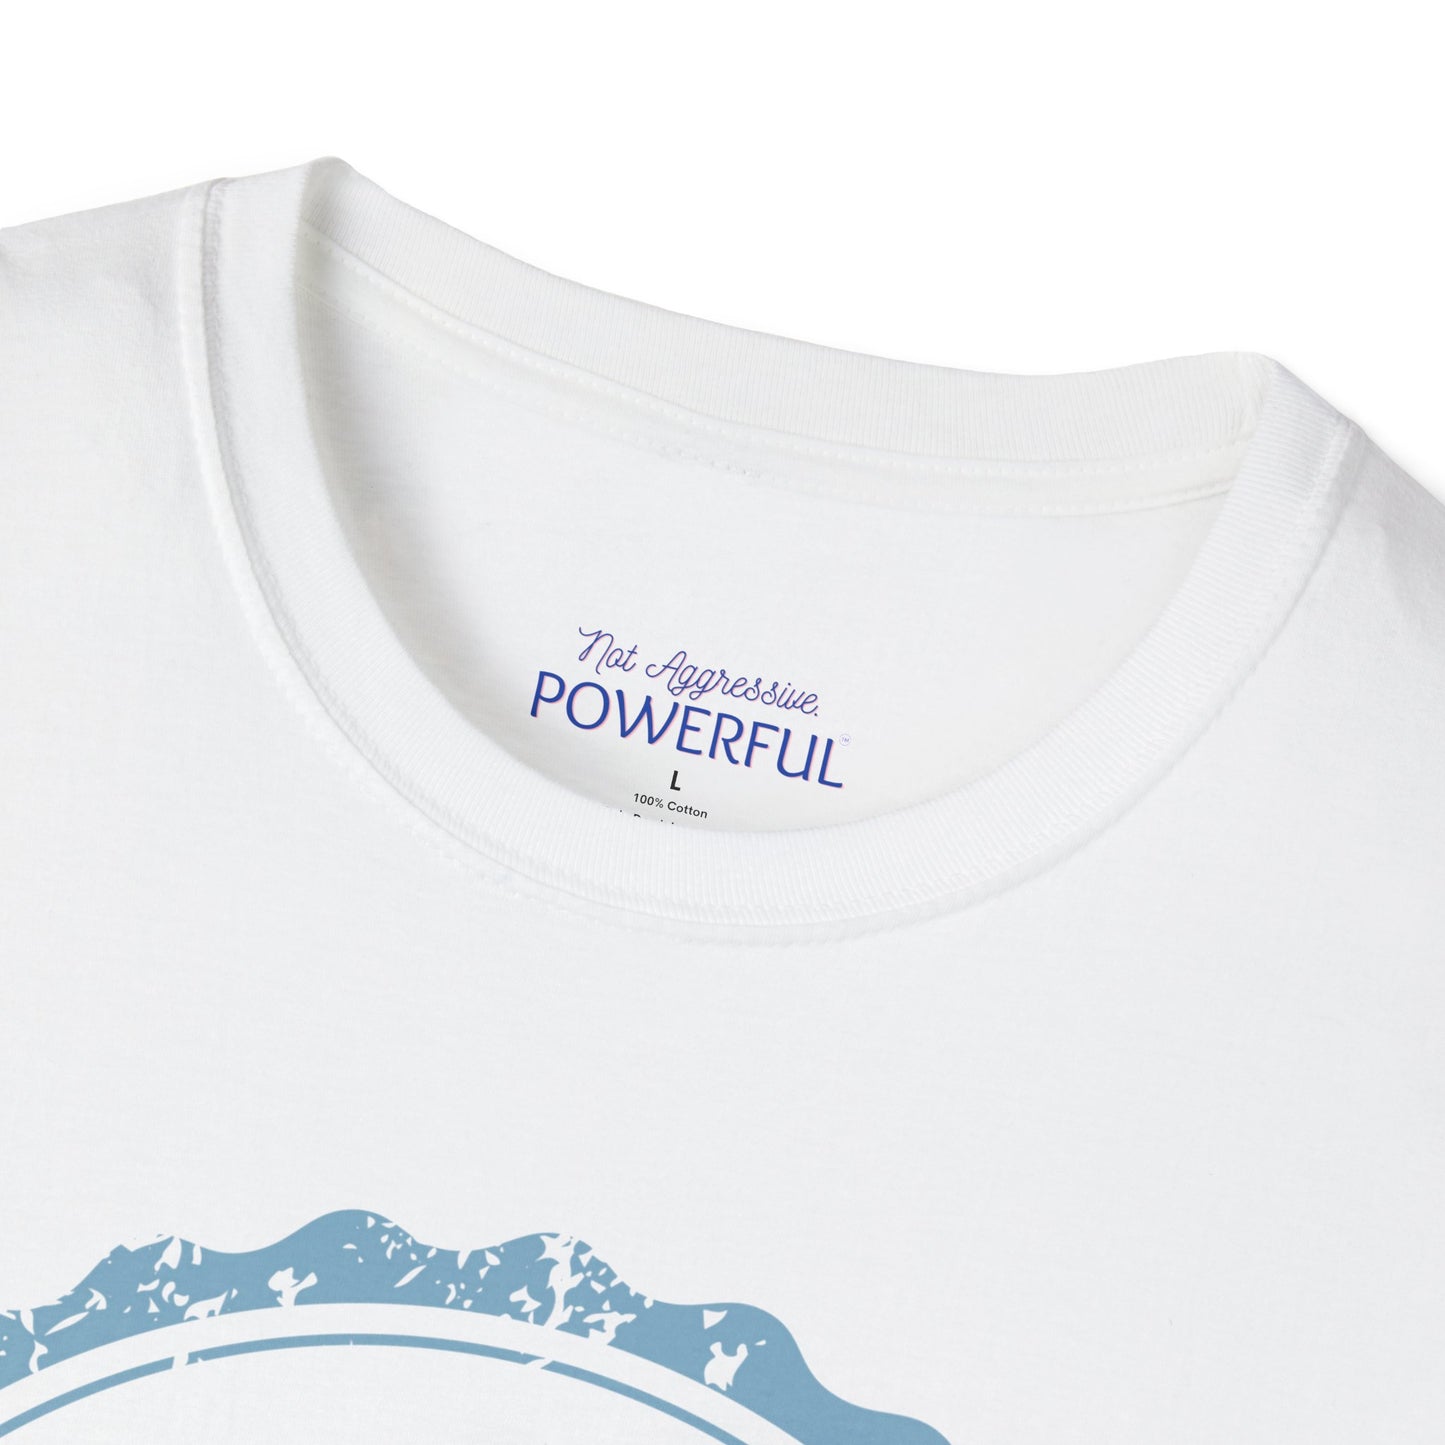 Cupid's Favorite-Project Manager Not Aggressive. POWERFUL™️ Not Aggressive. POWERFUL™️ Unisex Softstyle T-Shirt Eurofit